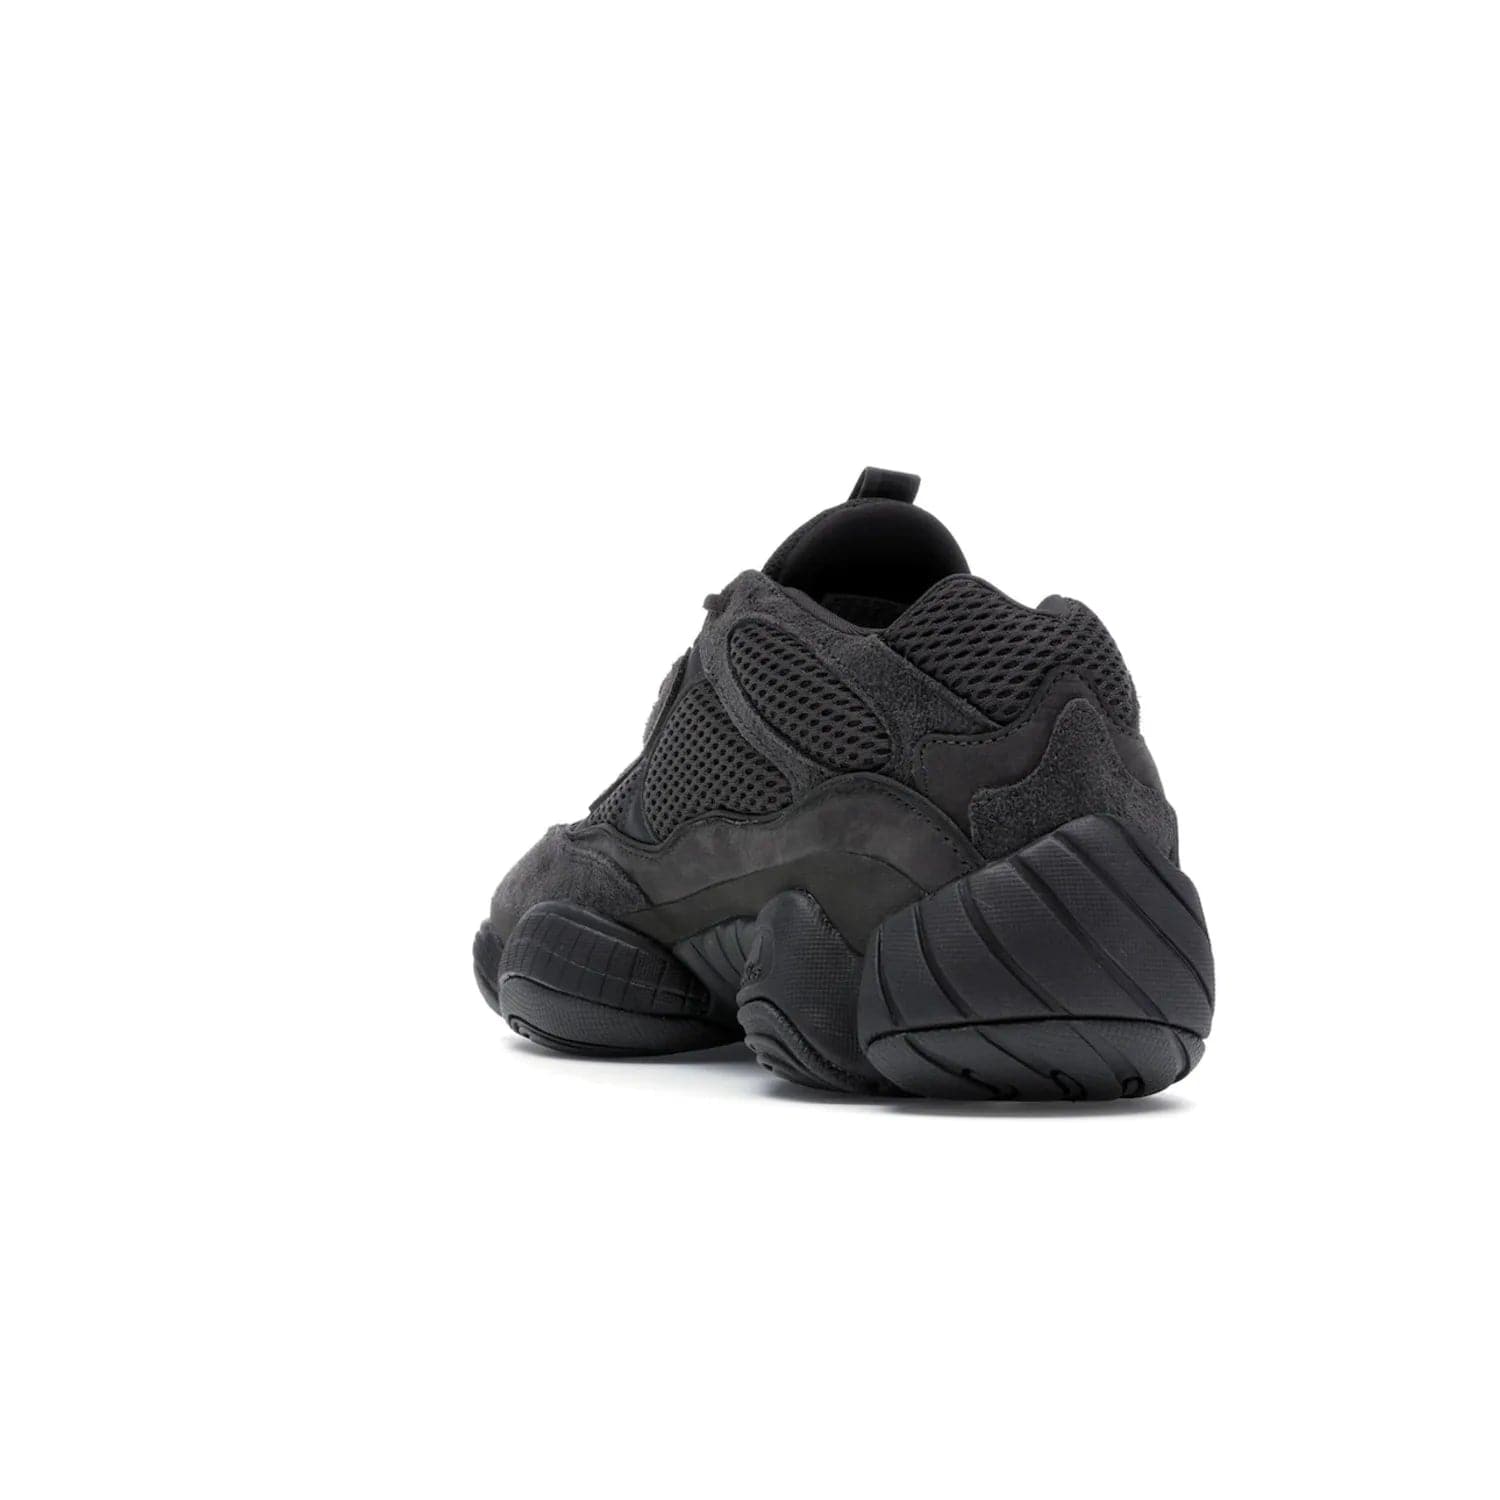 adidas Yeezy 500 Utility Black - Image 26 - Only at www.BallersClubKickz.com - Iconic adidas Yeezy 500 Utility Black in All-Black colorway. Durable black mesh and suede upper with adiPRENE® sole delivers comfort and support. Be unstoppable with the Yeezy 500 Utility Black. Released July 2018.